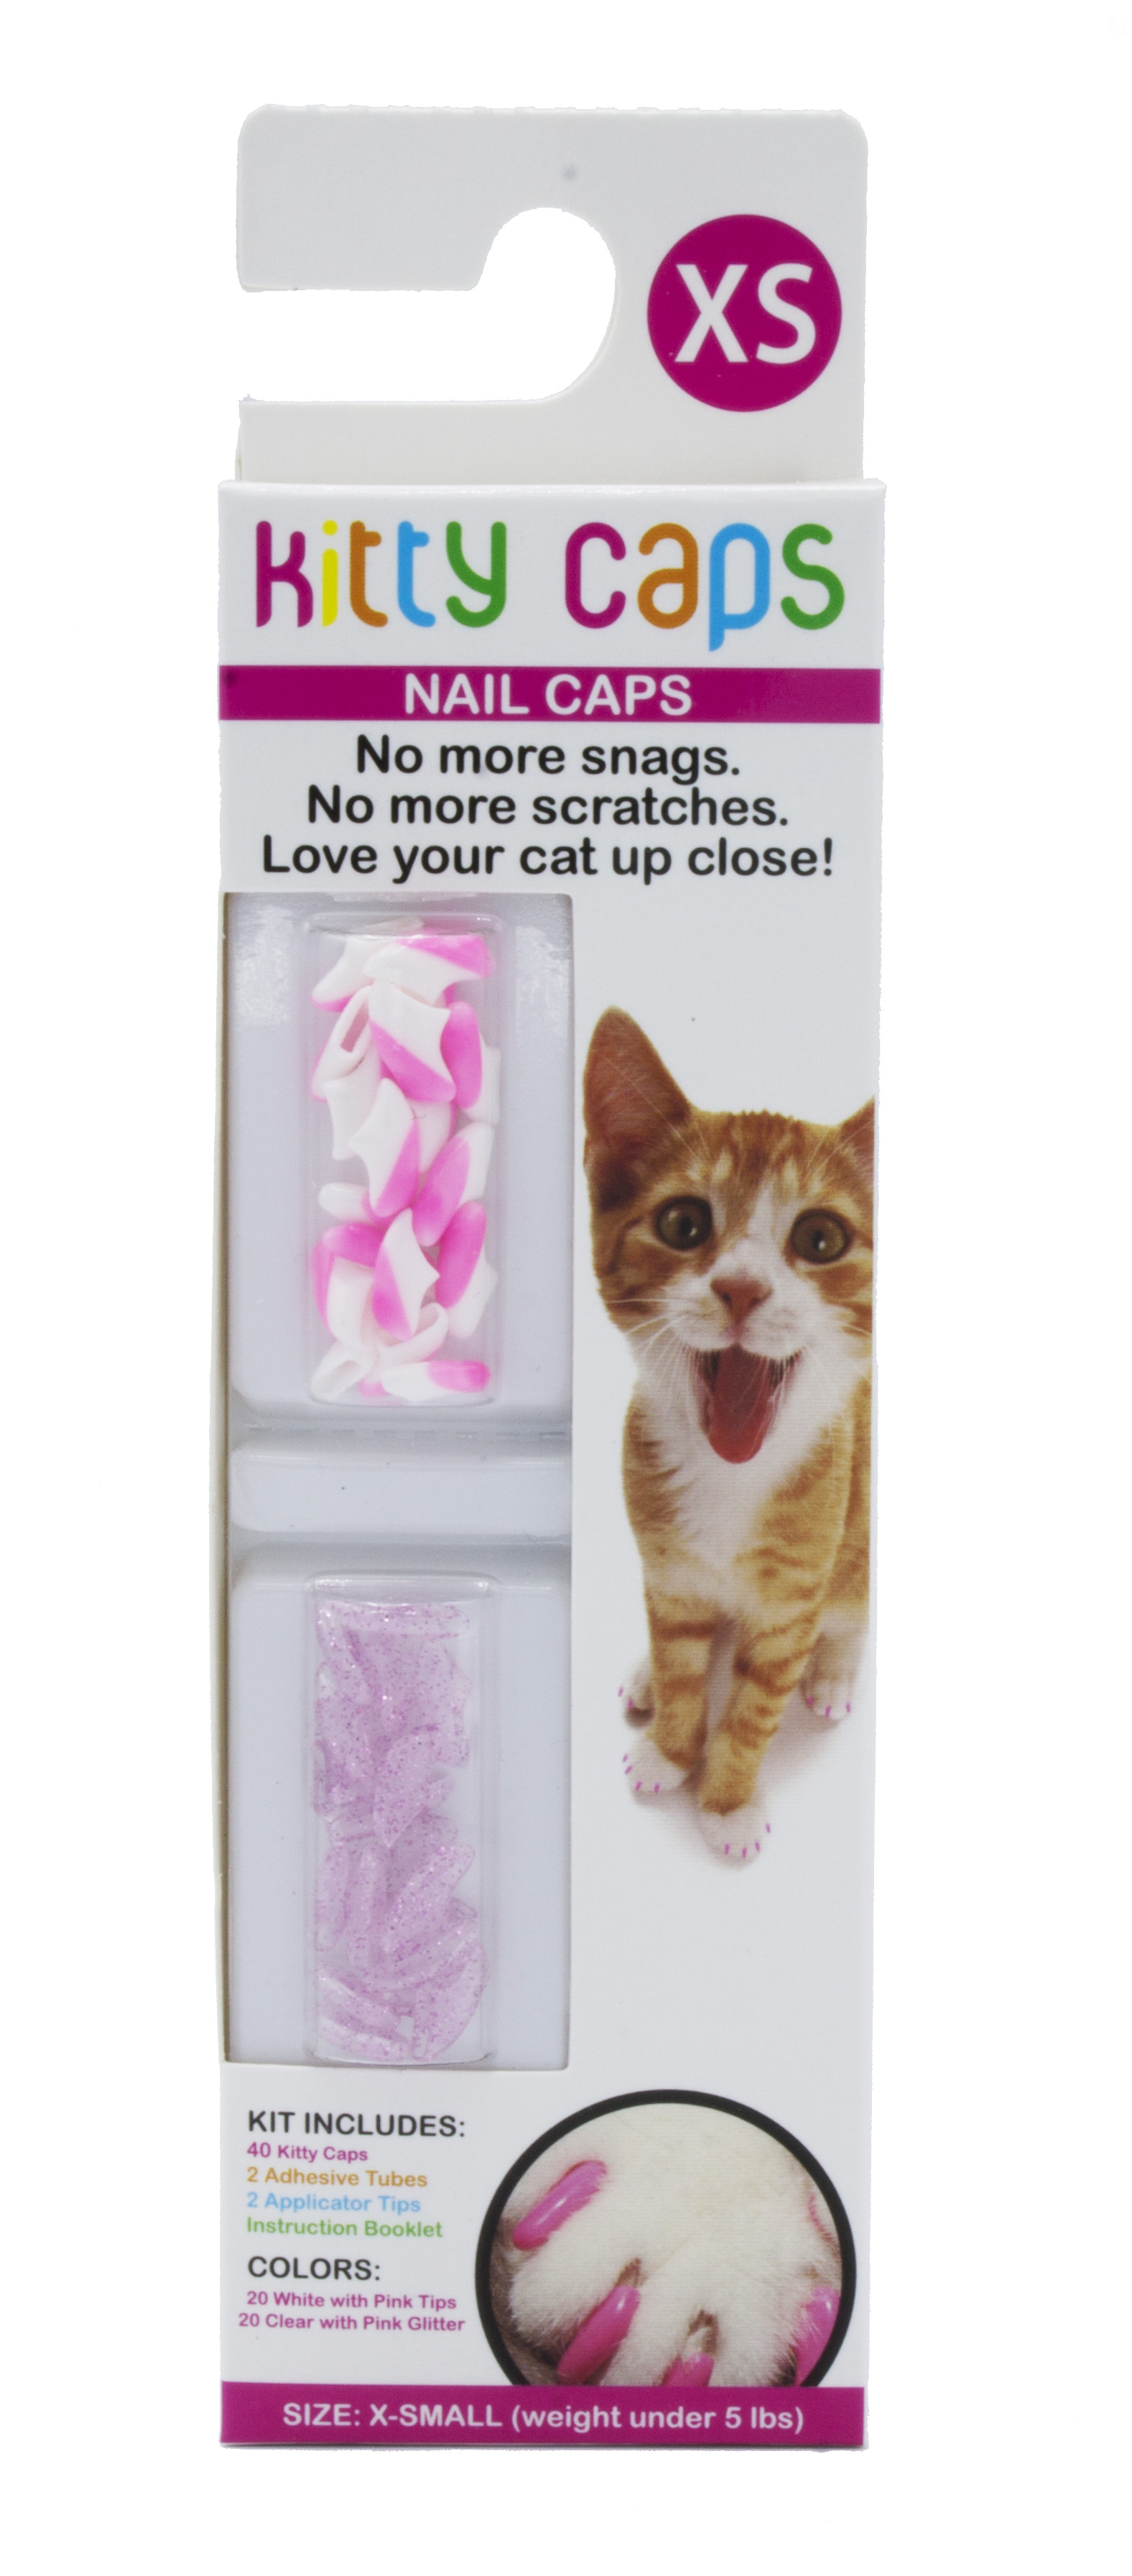 https://www.fetch4pets.com/hubfs/fetch4pets_2019/product/kitty-caps-nail-caps-white-with-pink-tips-clear-with-pink-glitter-40-count-x-small/KittyCapsXSmallClearPinkGlitter_FRONT_FFP9314.jpg